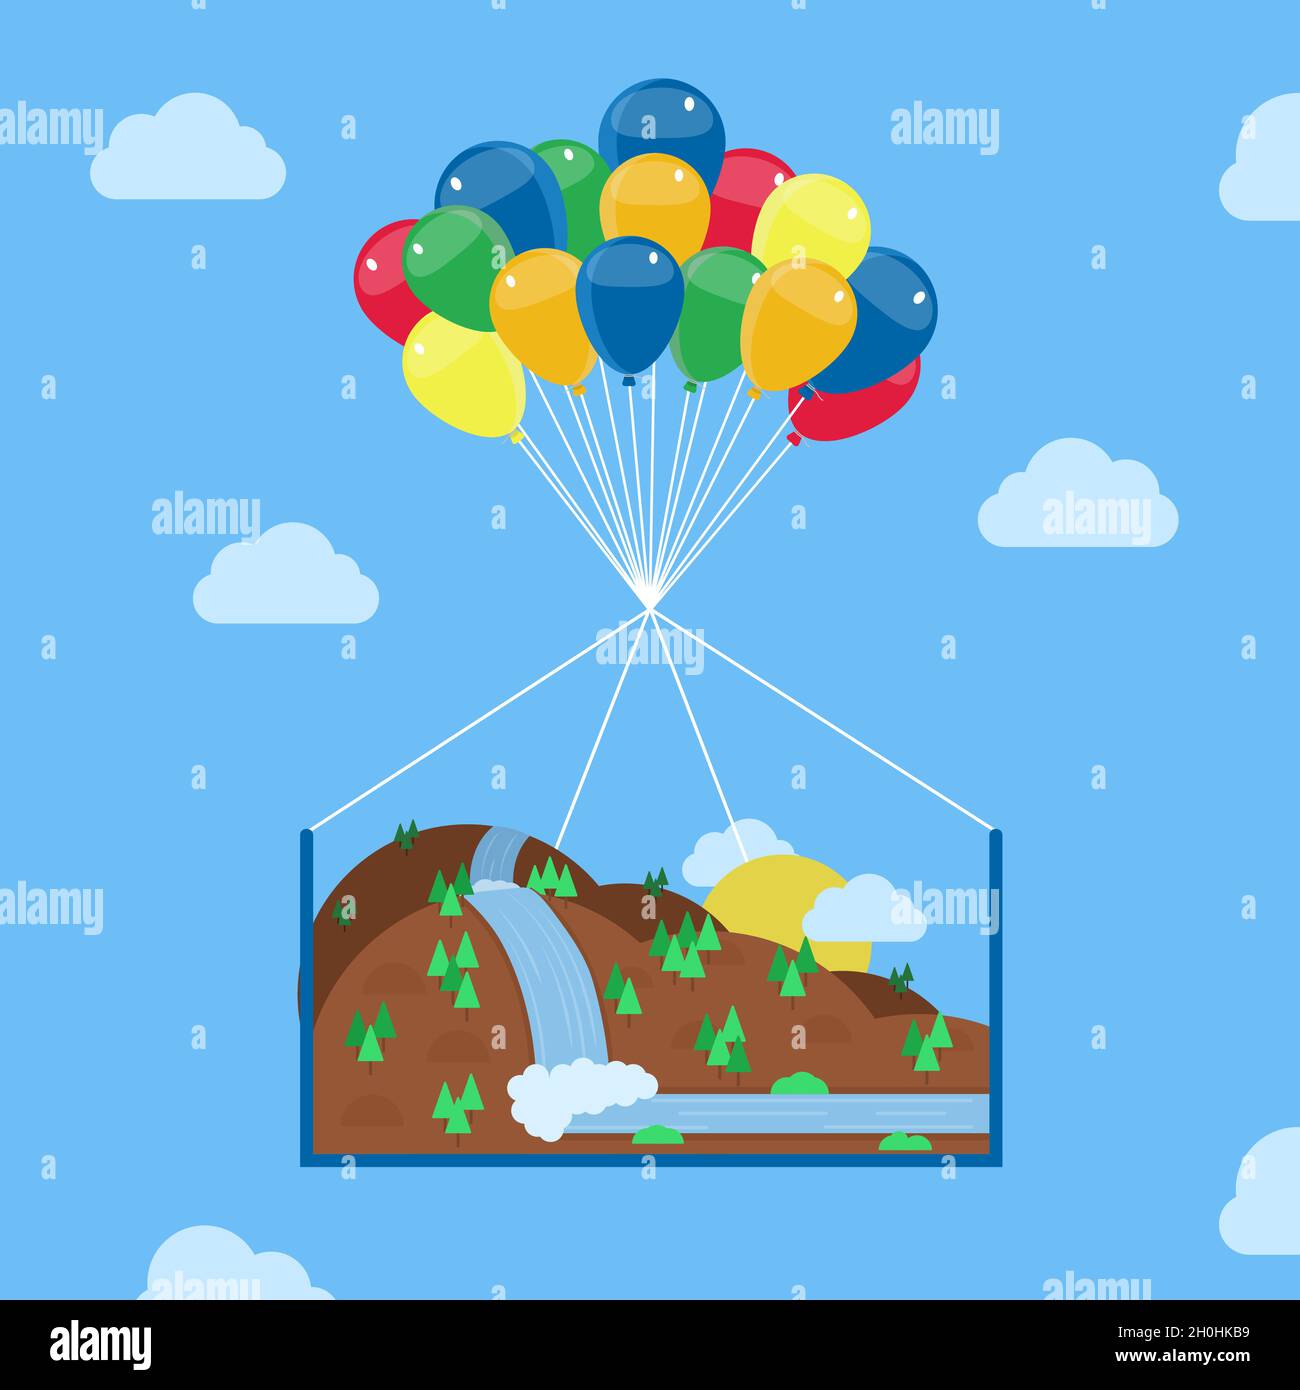 Landscape composed of mountains, hills, trees and a waterfall being taken to the skies by helium balloons. Conceptual vector illustration. Dream and f Stock Vector